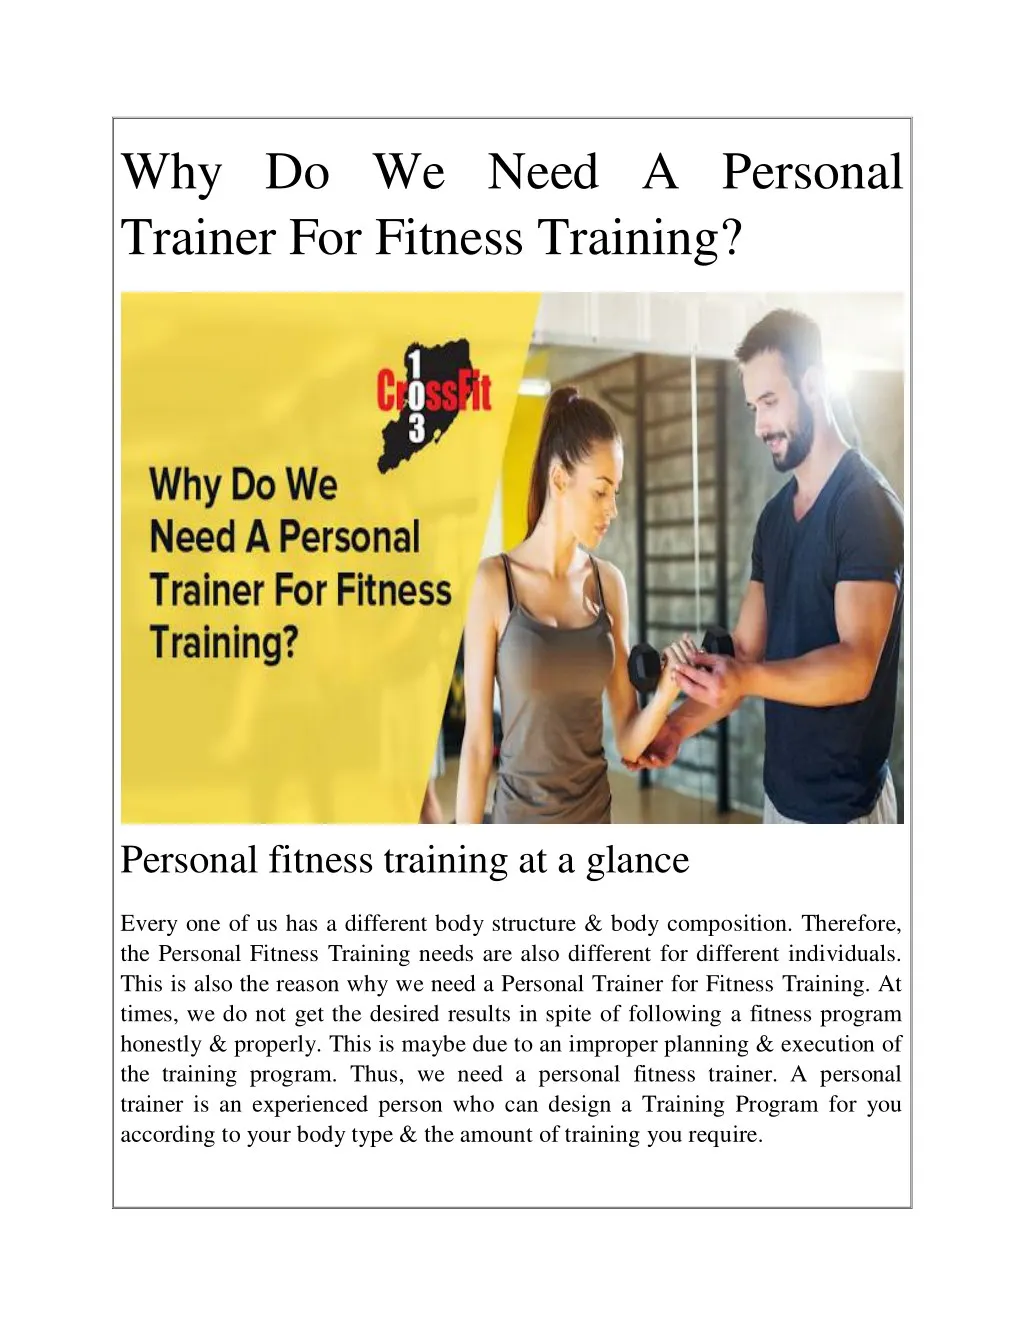 why do we need a personal trainer for fitness